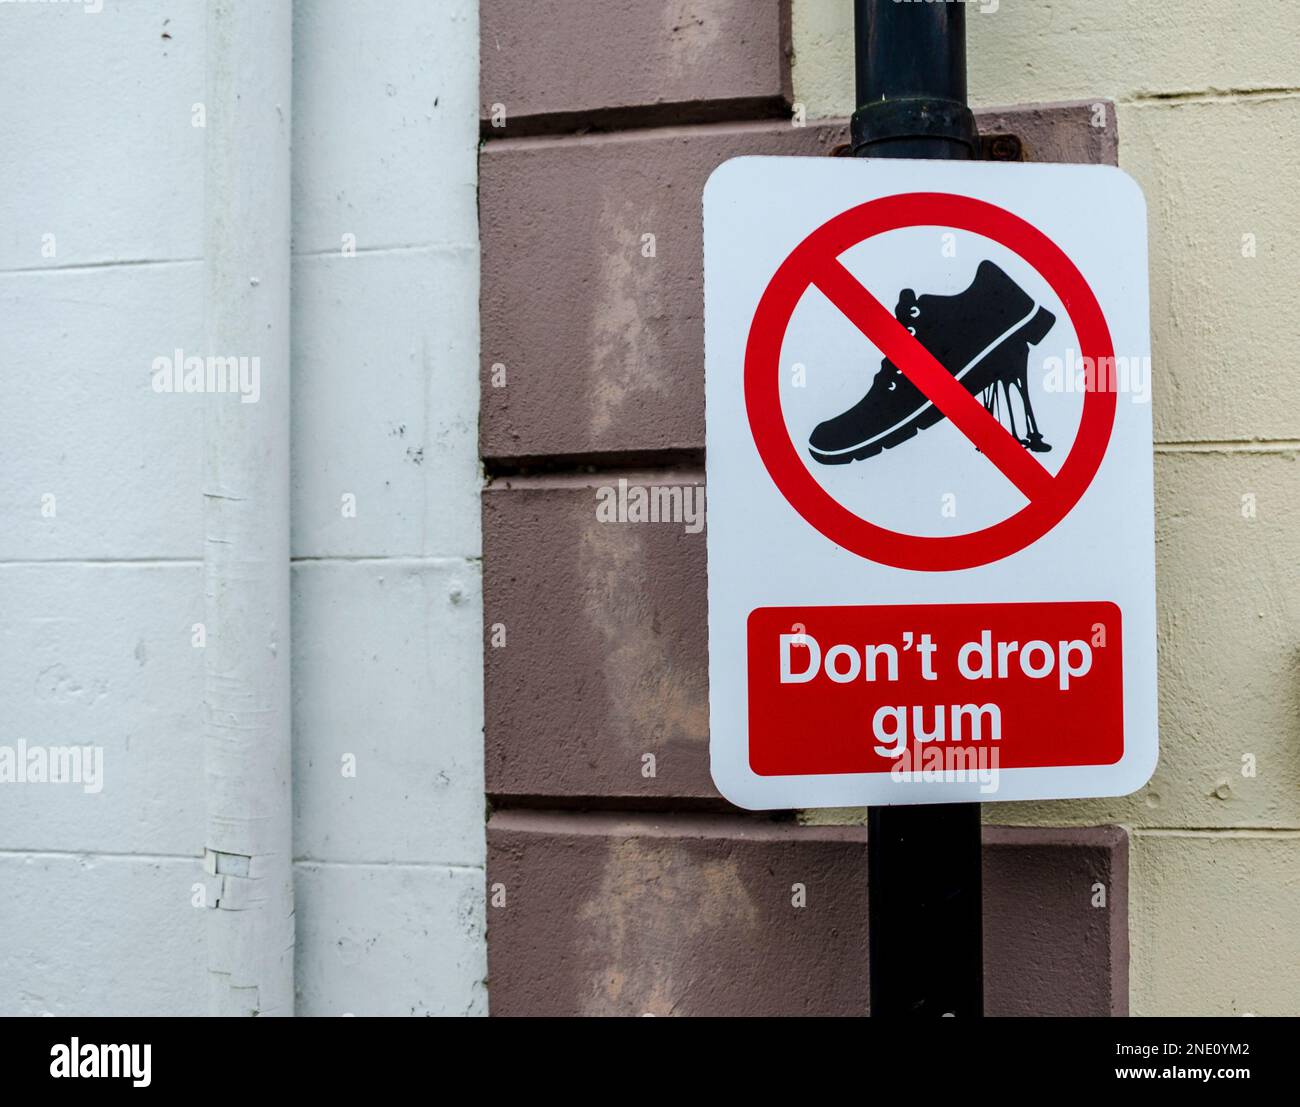 Don't Drop Gum street sign, red writing on white background Stock Photo